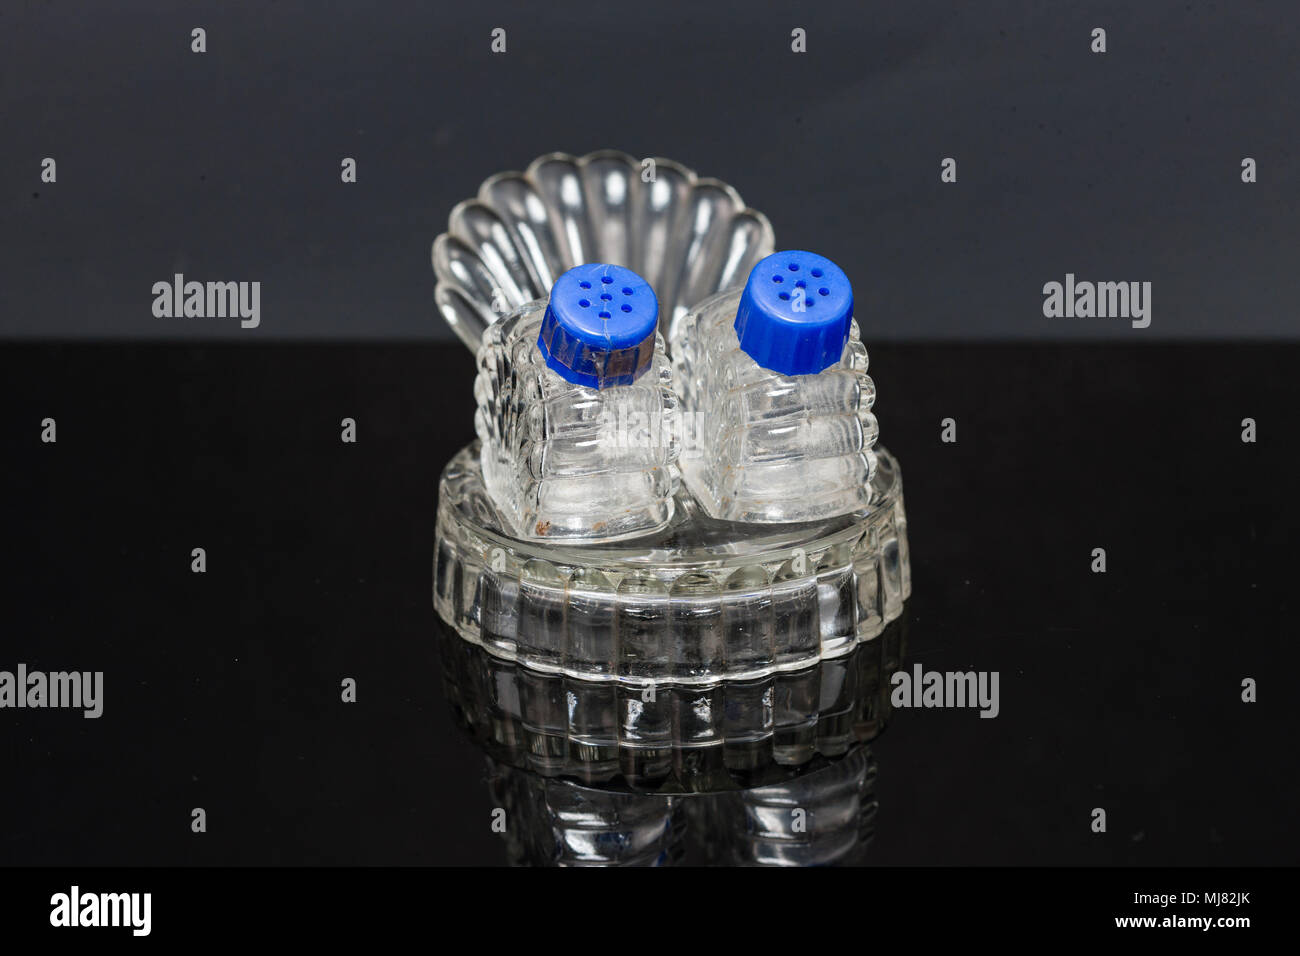 a glass salt and pepper shakers sitting on a clear glass platform Stock Photo